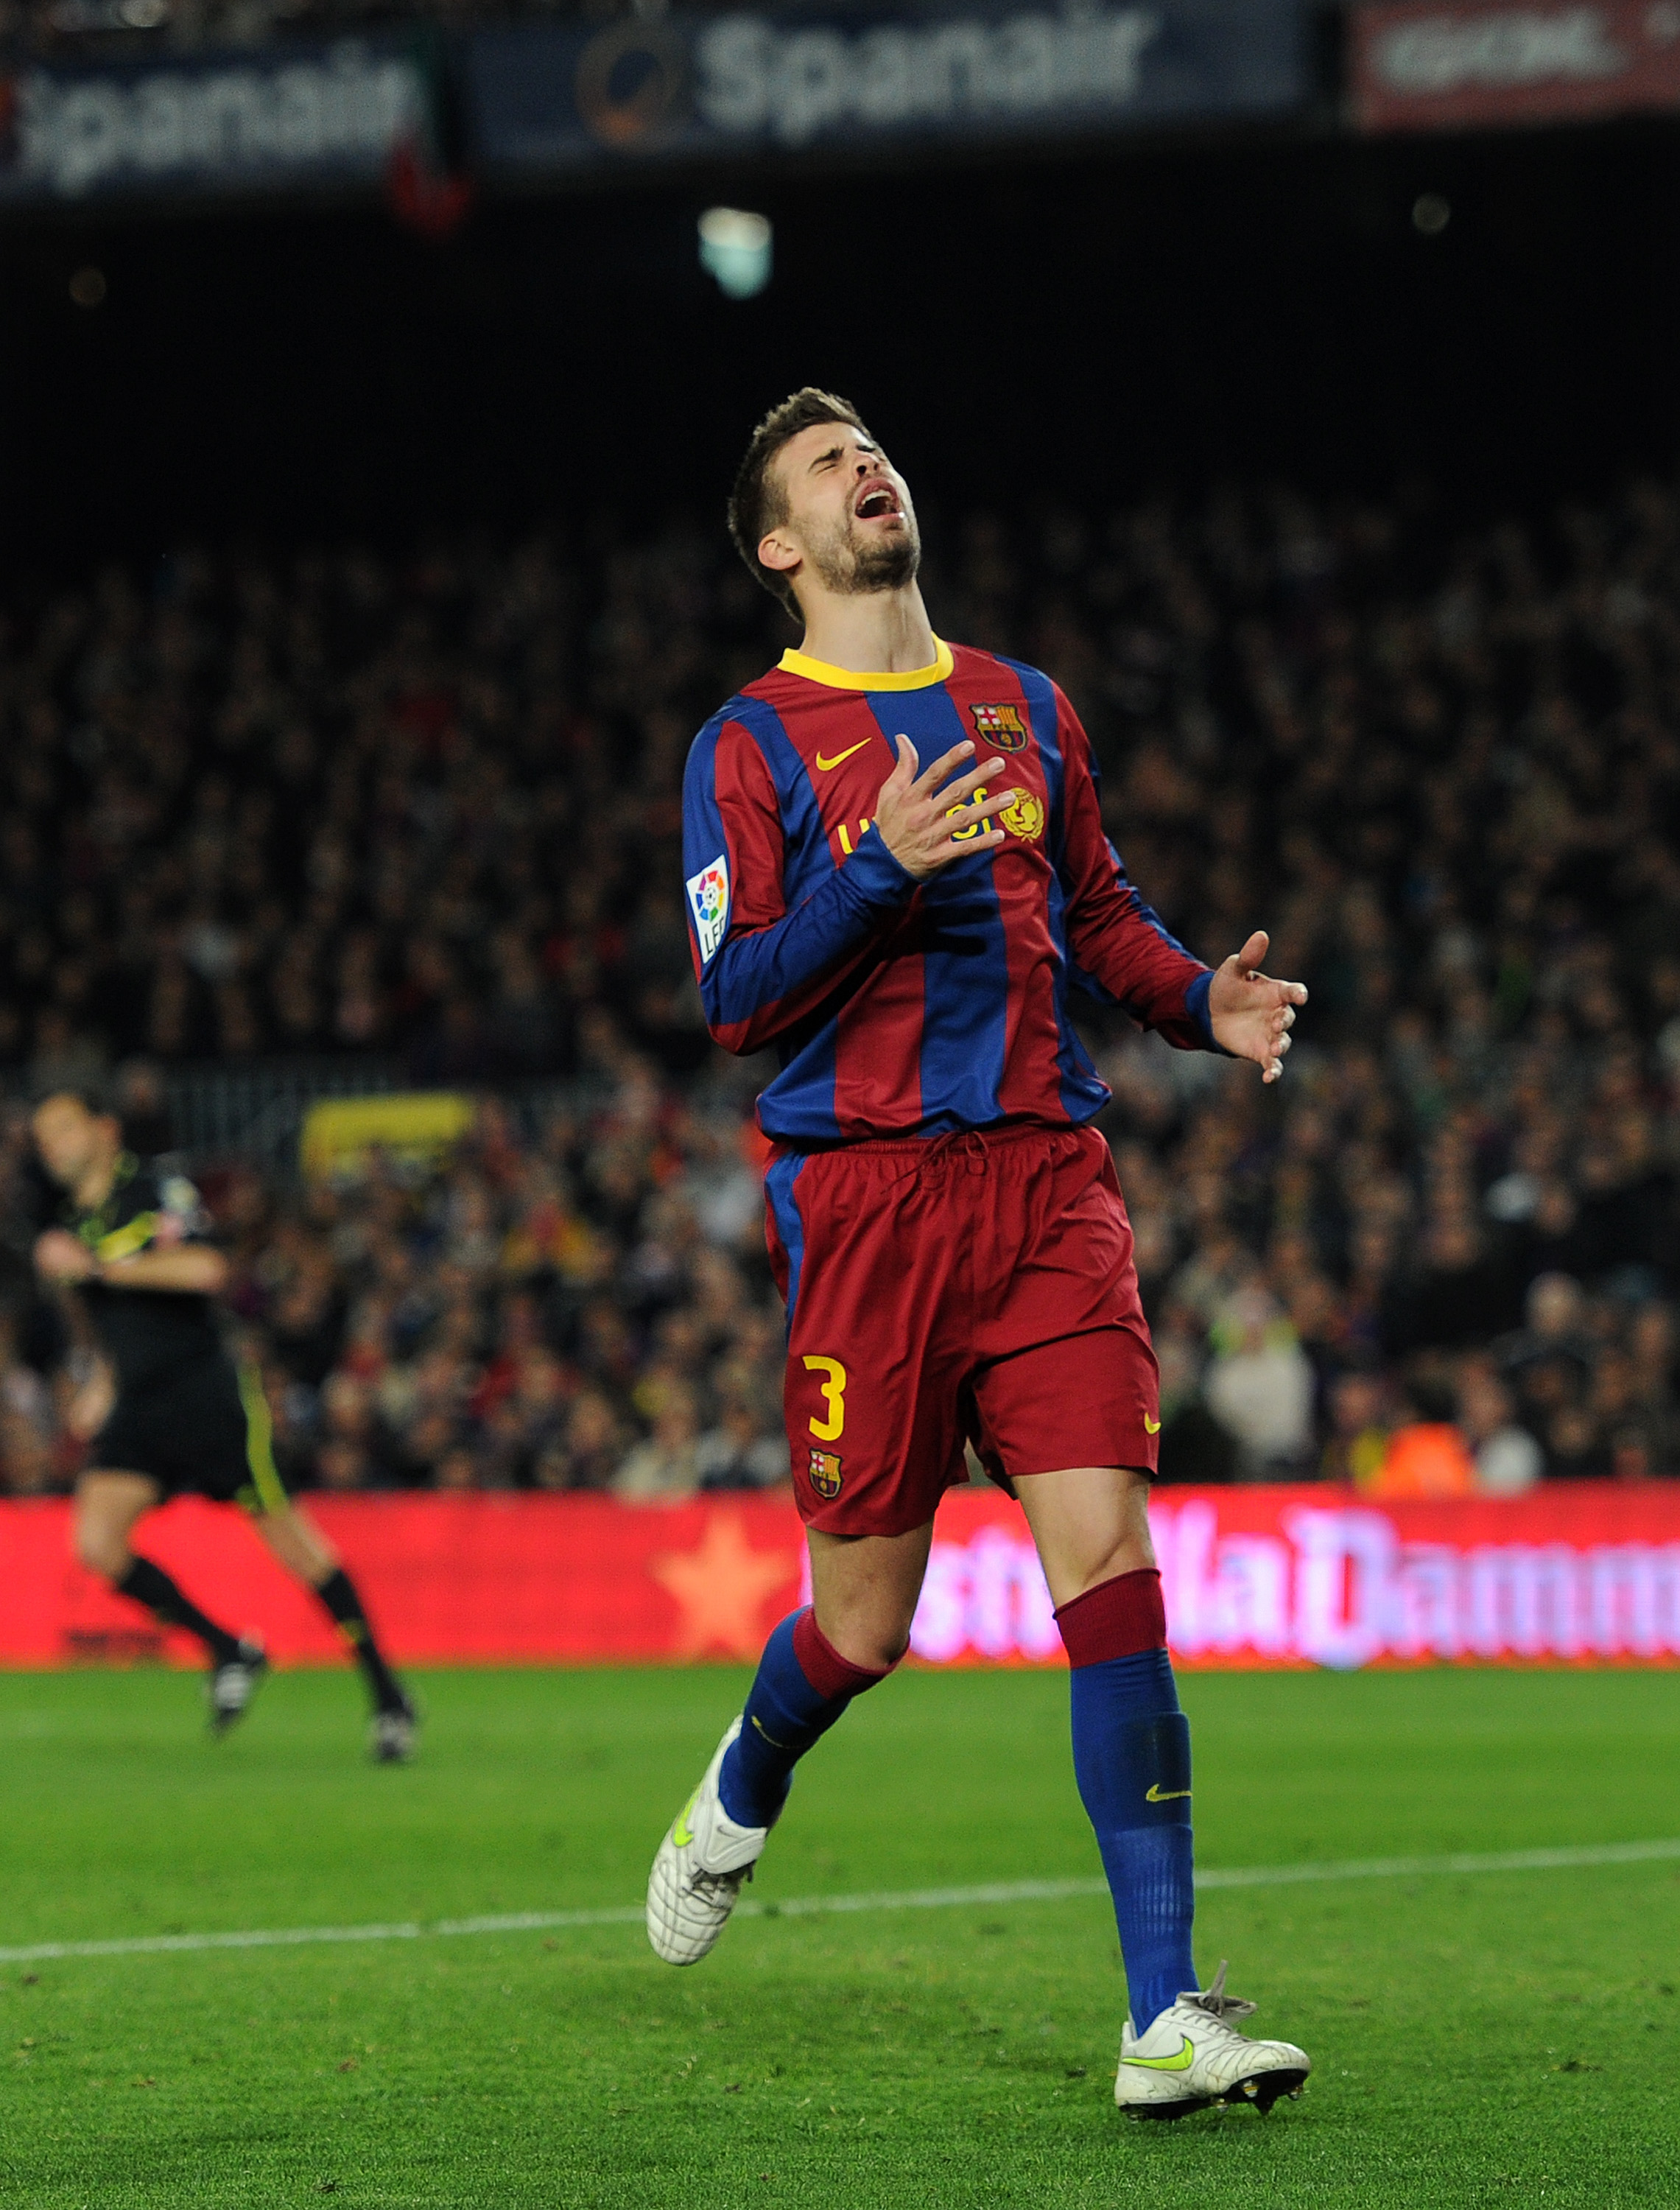 BARCELONA, SPAIN - MARCH 05:  Gerard Pique of Barcelona reacts as he fails to score during the la Liga match between Barcelona and Real Zaragoza at the Camp Nou stadium on March 5, 2011 in Barcelona, Spain.  (Photo by Jasper Juinen/Getty Images)